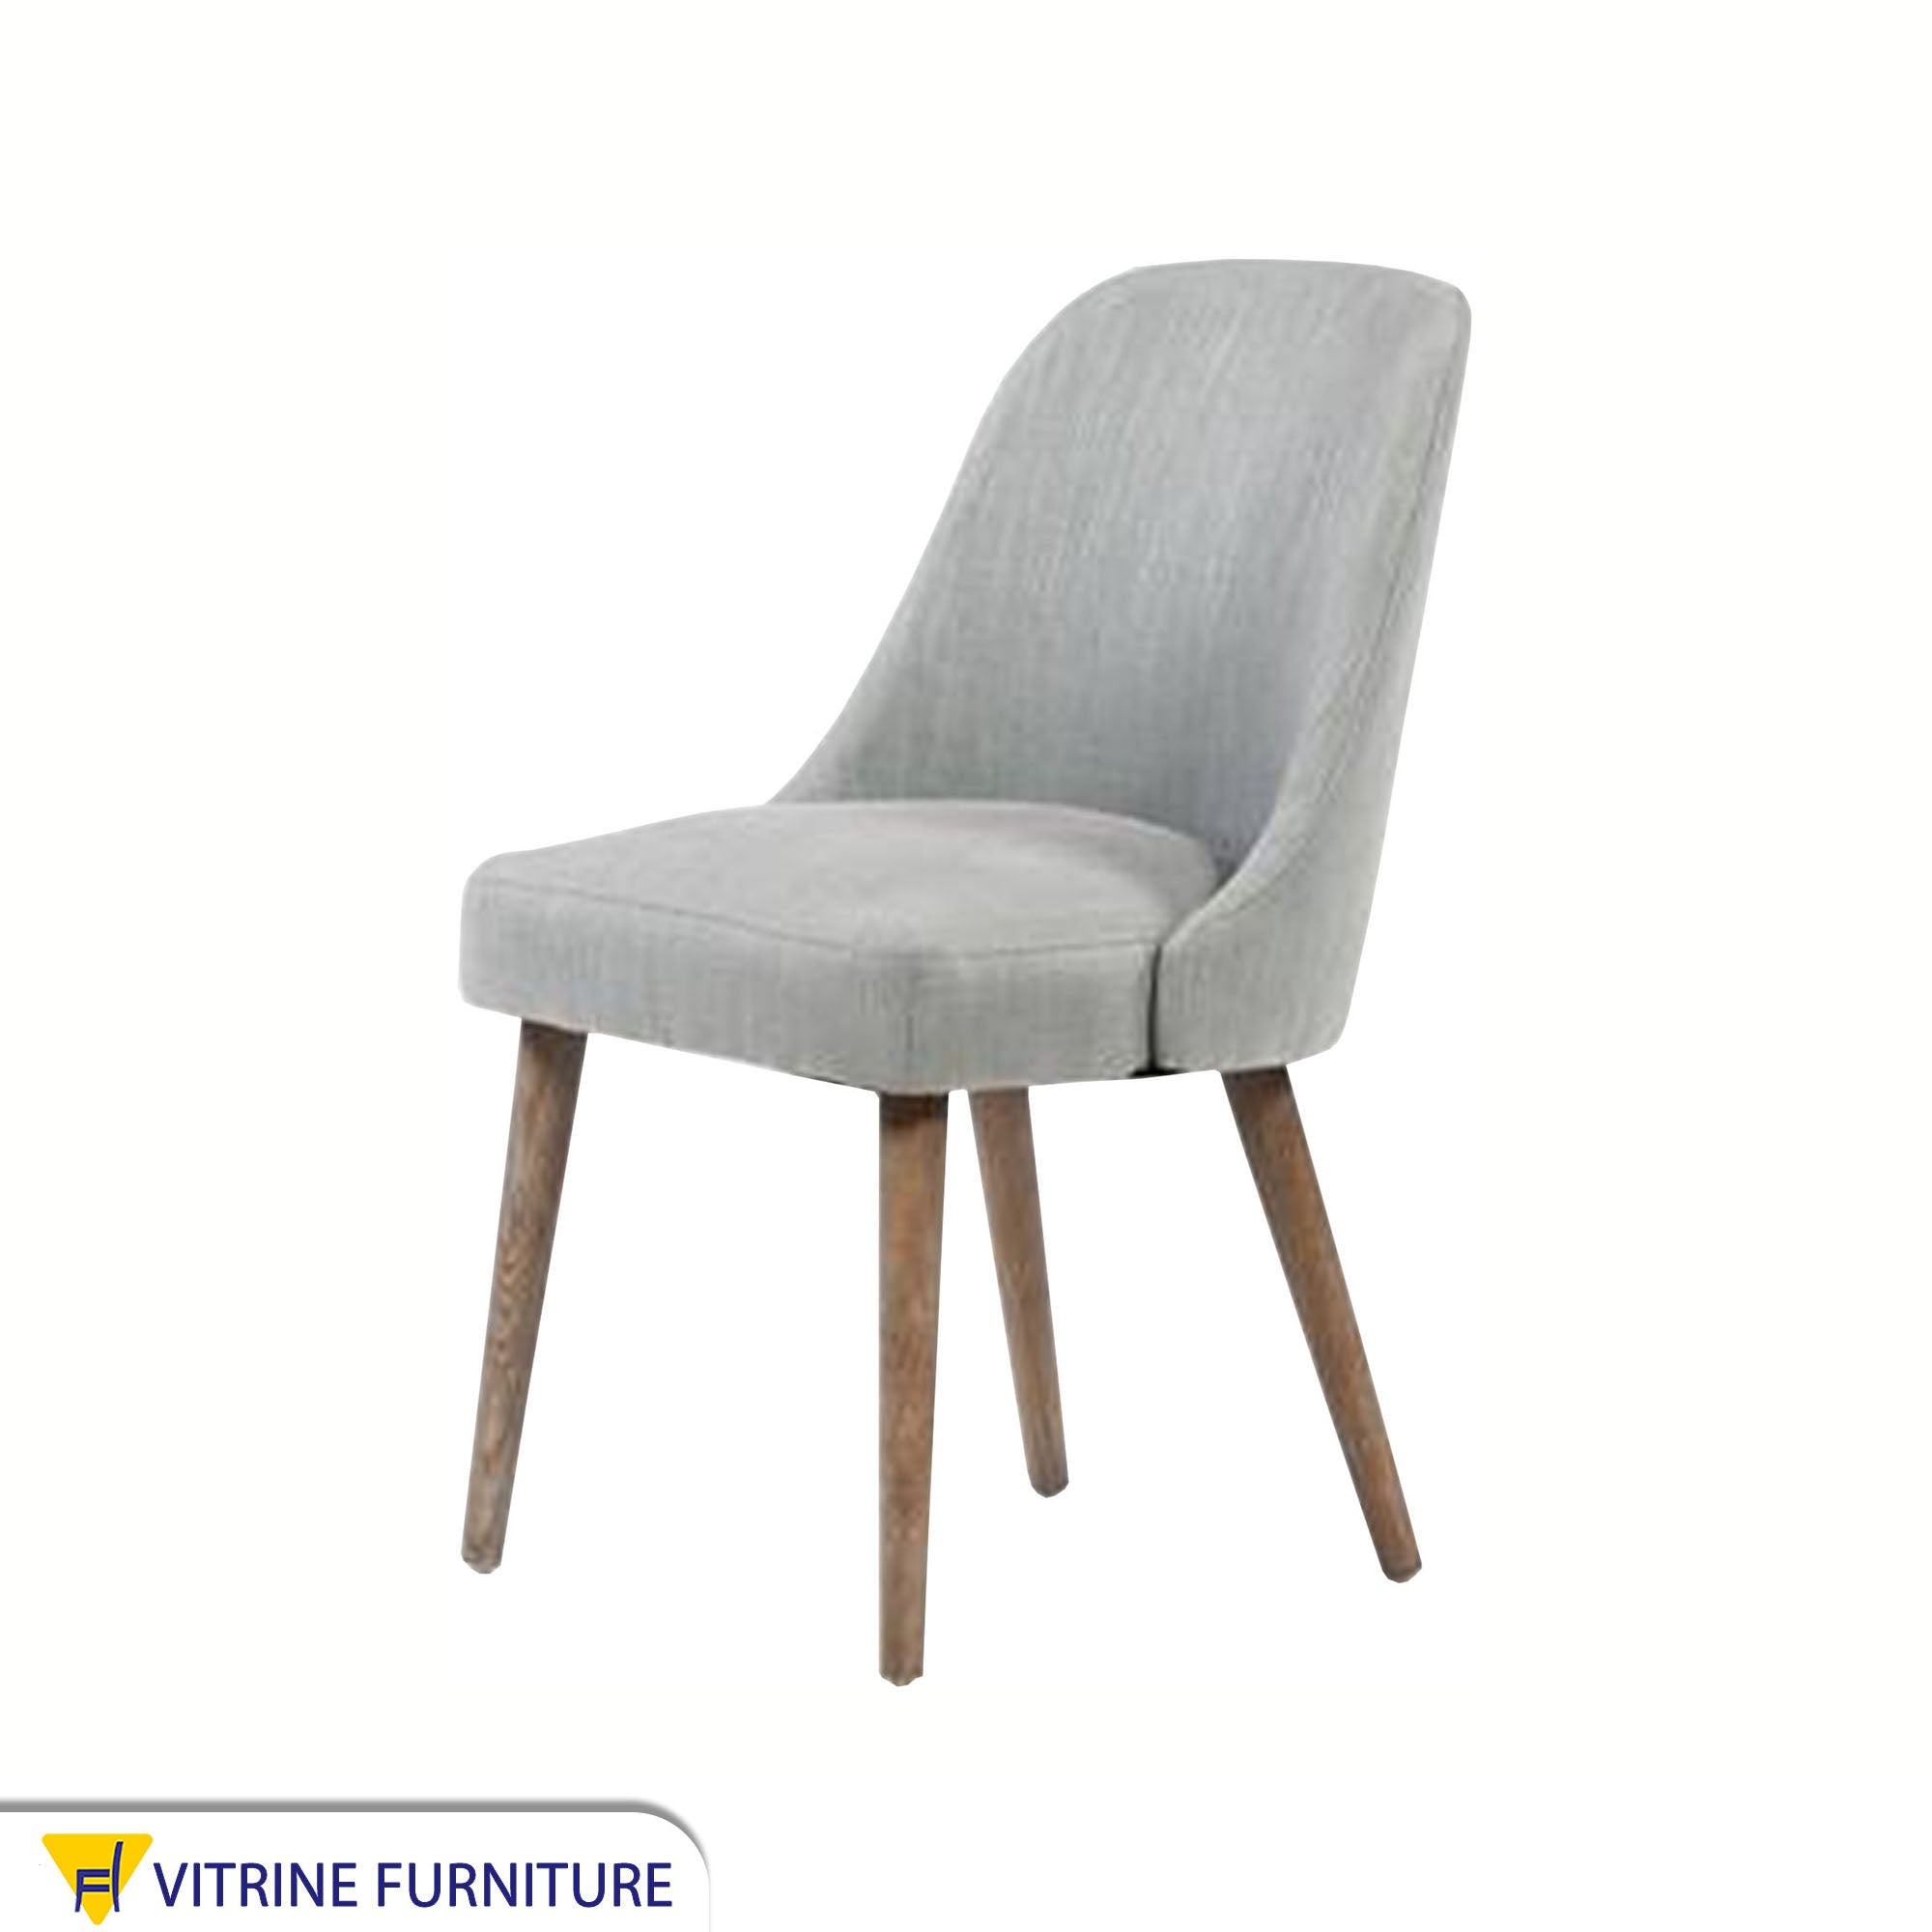 Grey upholstered chair